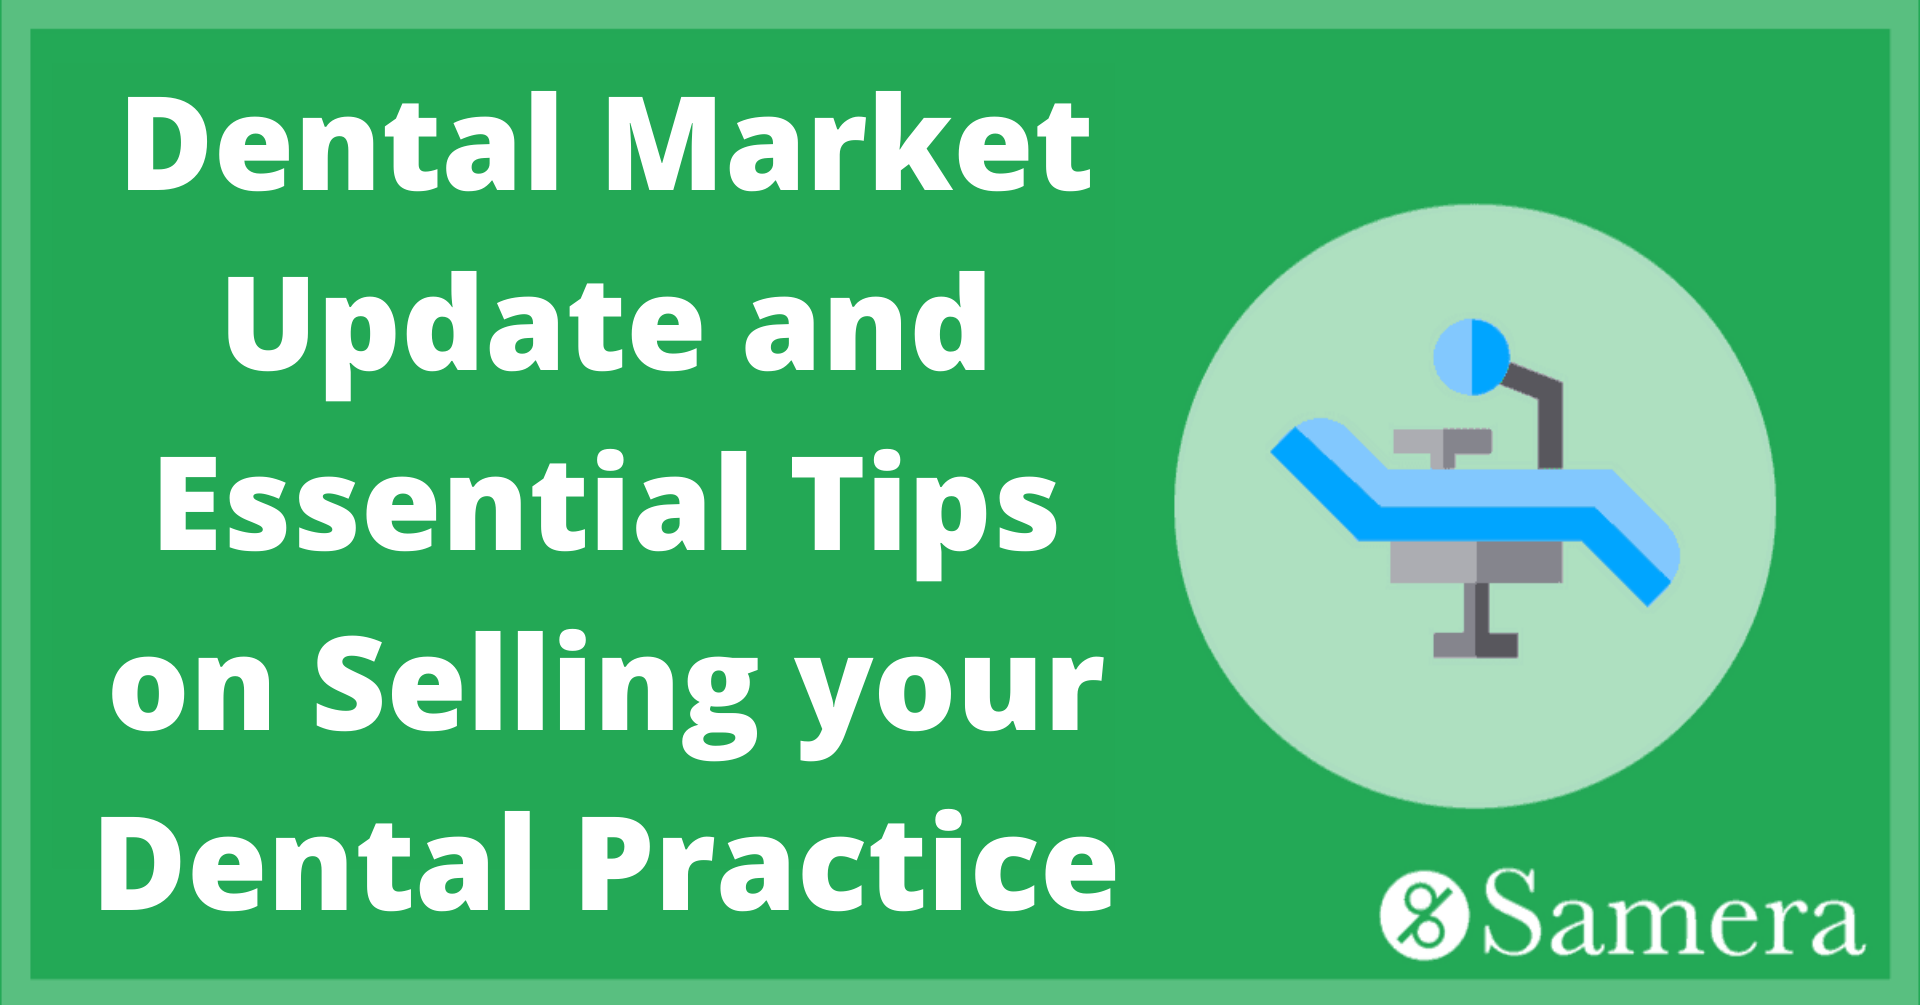 Dental Market Update and Essential Tips on Selling your Dental Practice